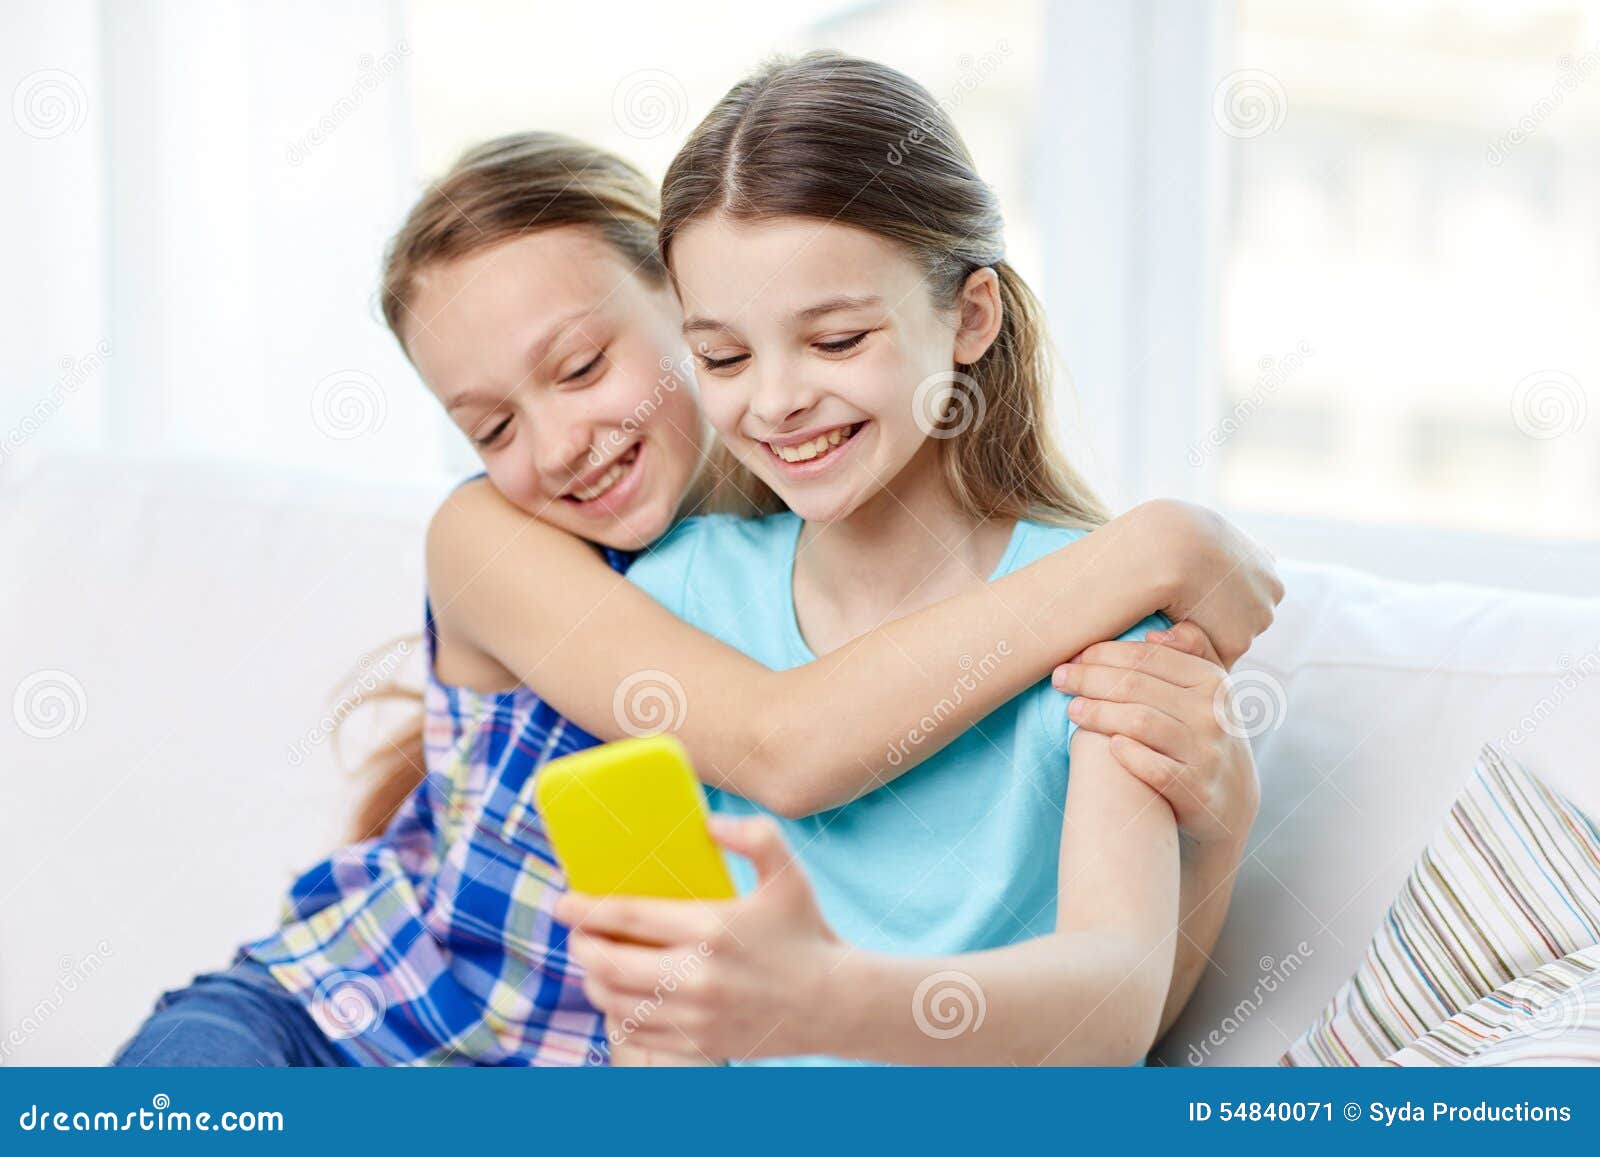 Happy Girls with Smartphone Taking Selfie at Home Stock Image - Image ...